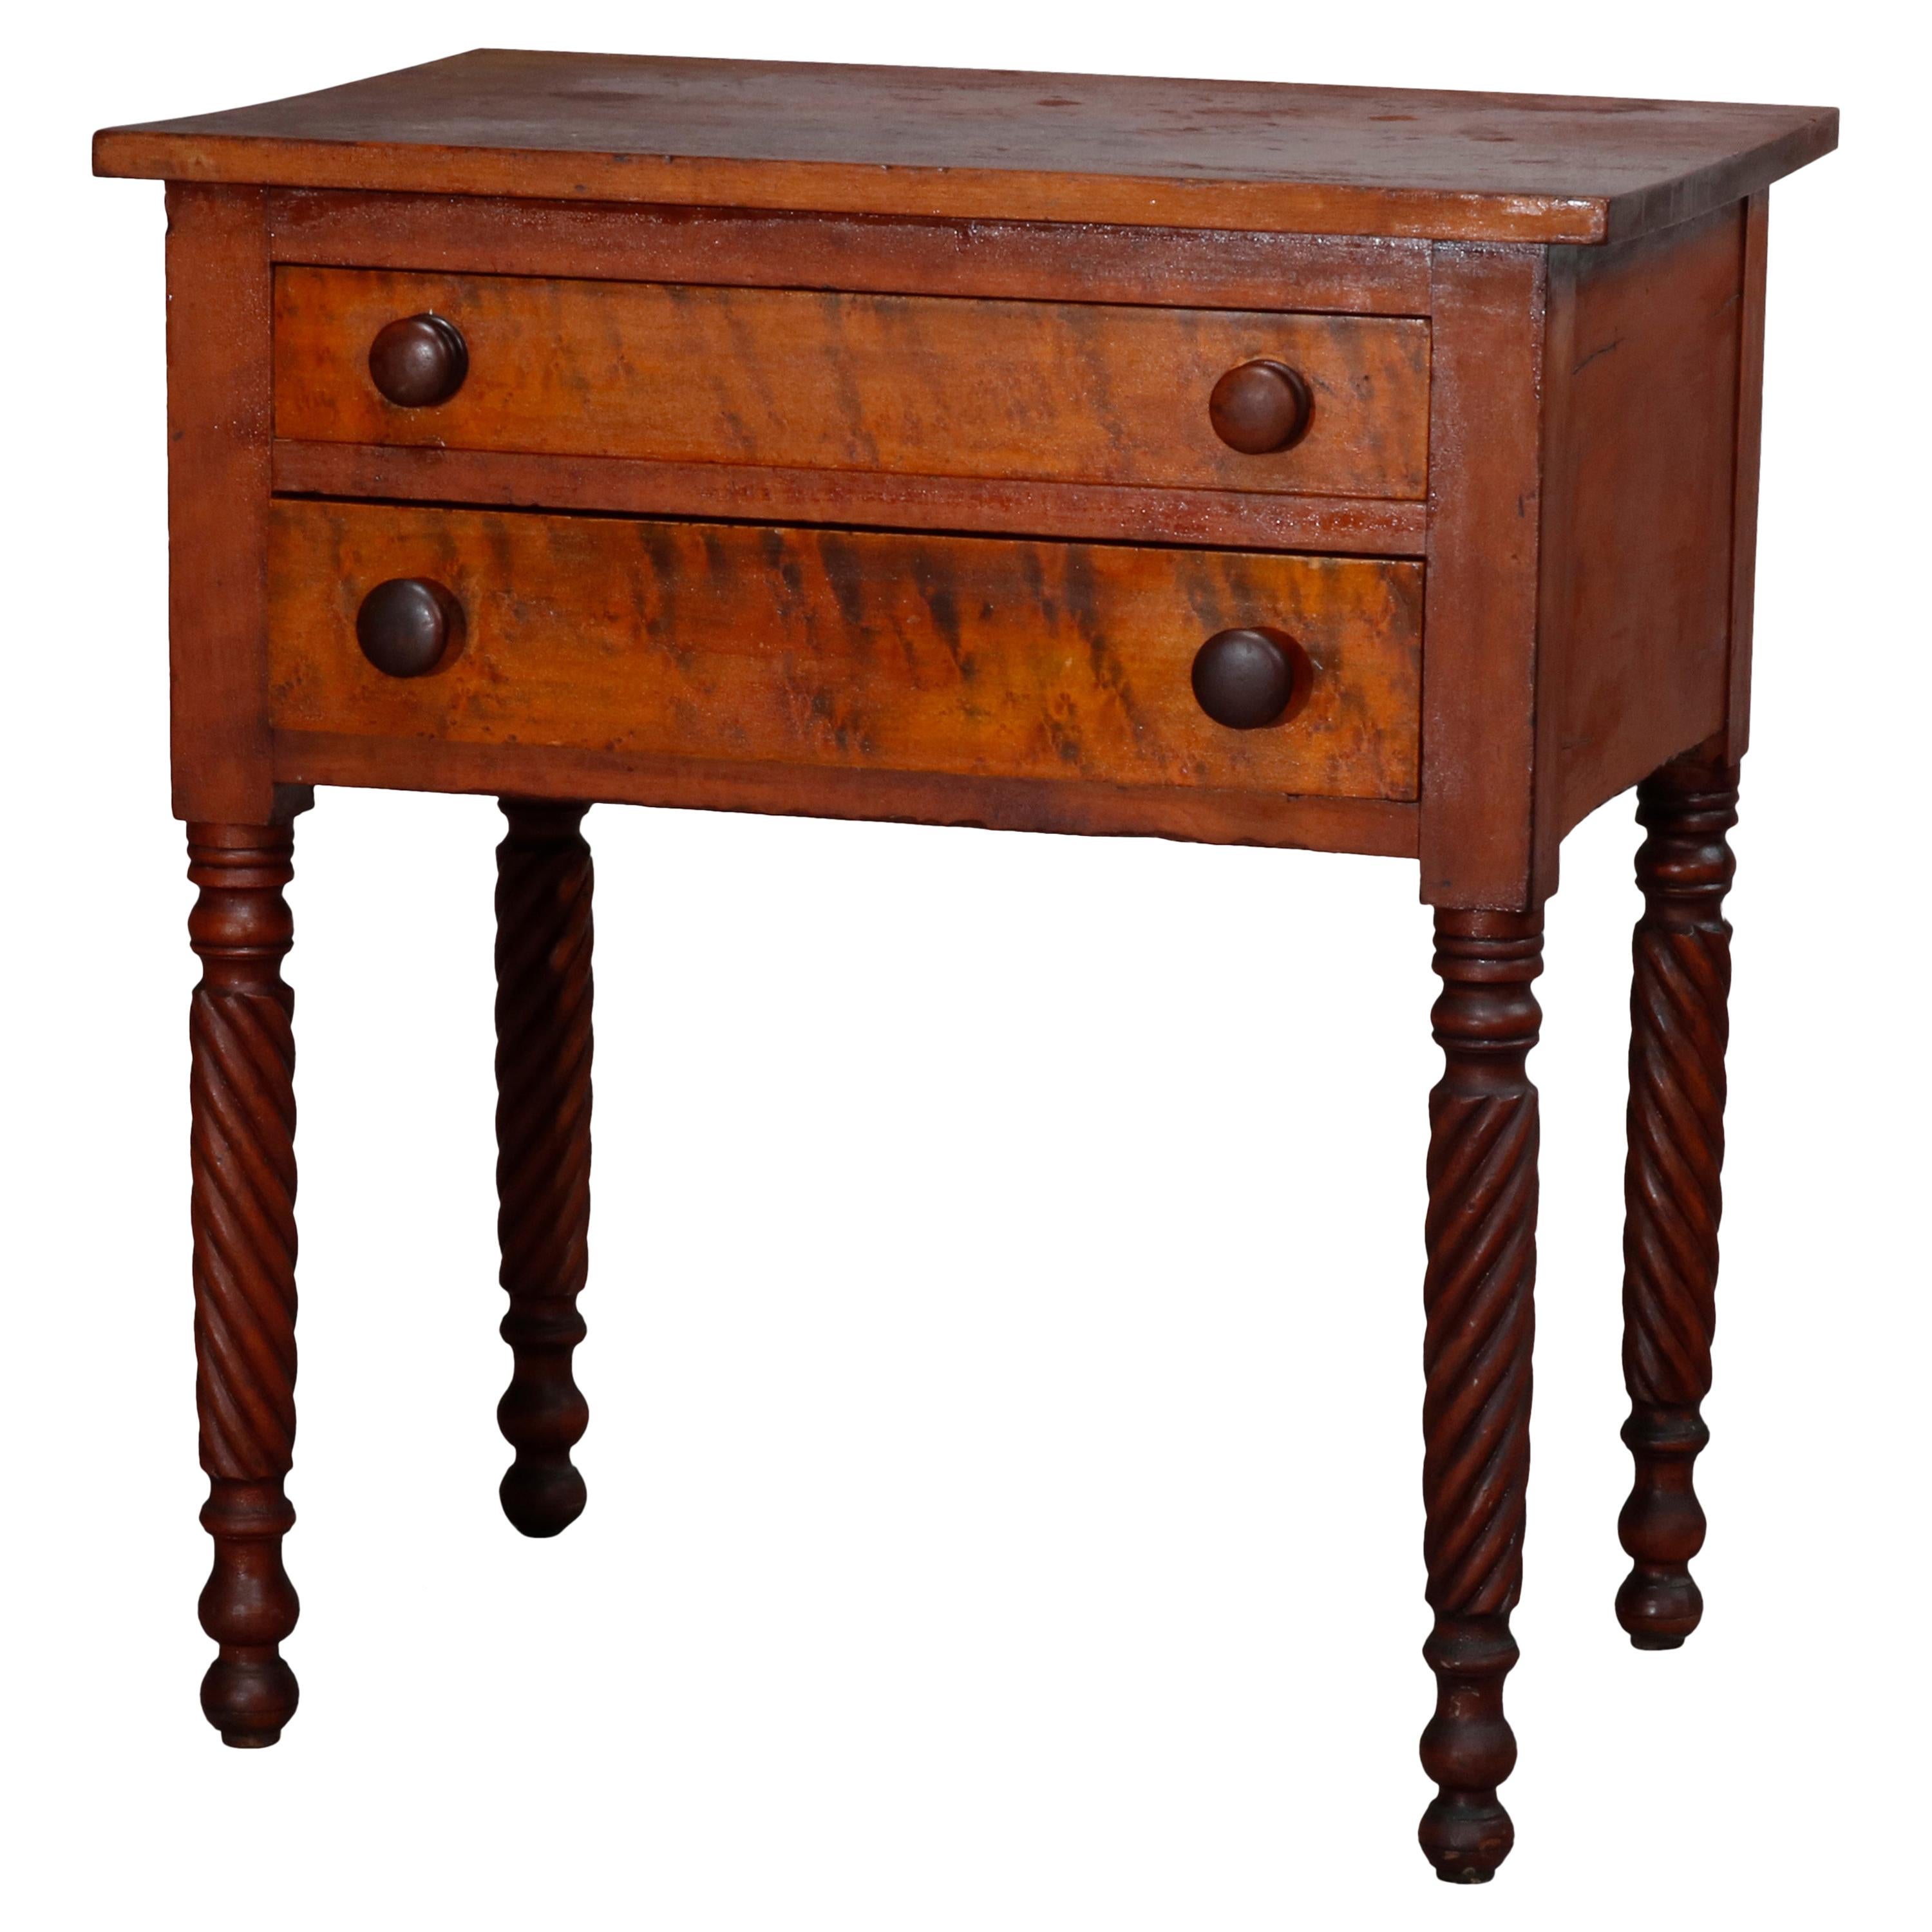 Antique Sheraton Cherry and Bird's-Eye Maple Two-Drawer Stand, circa 1840